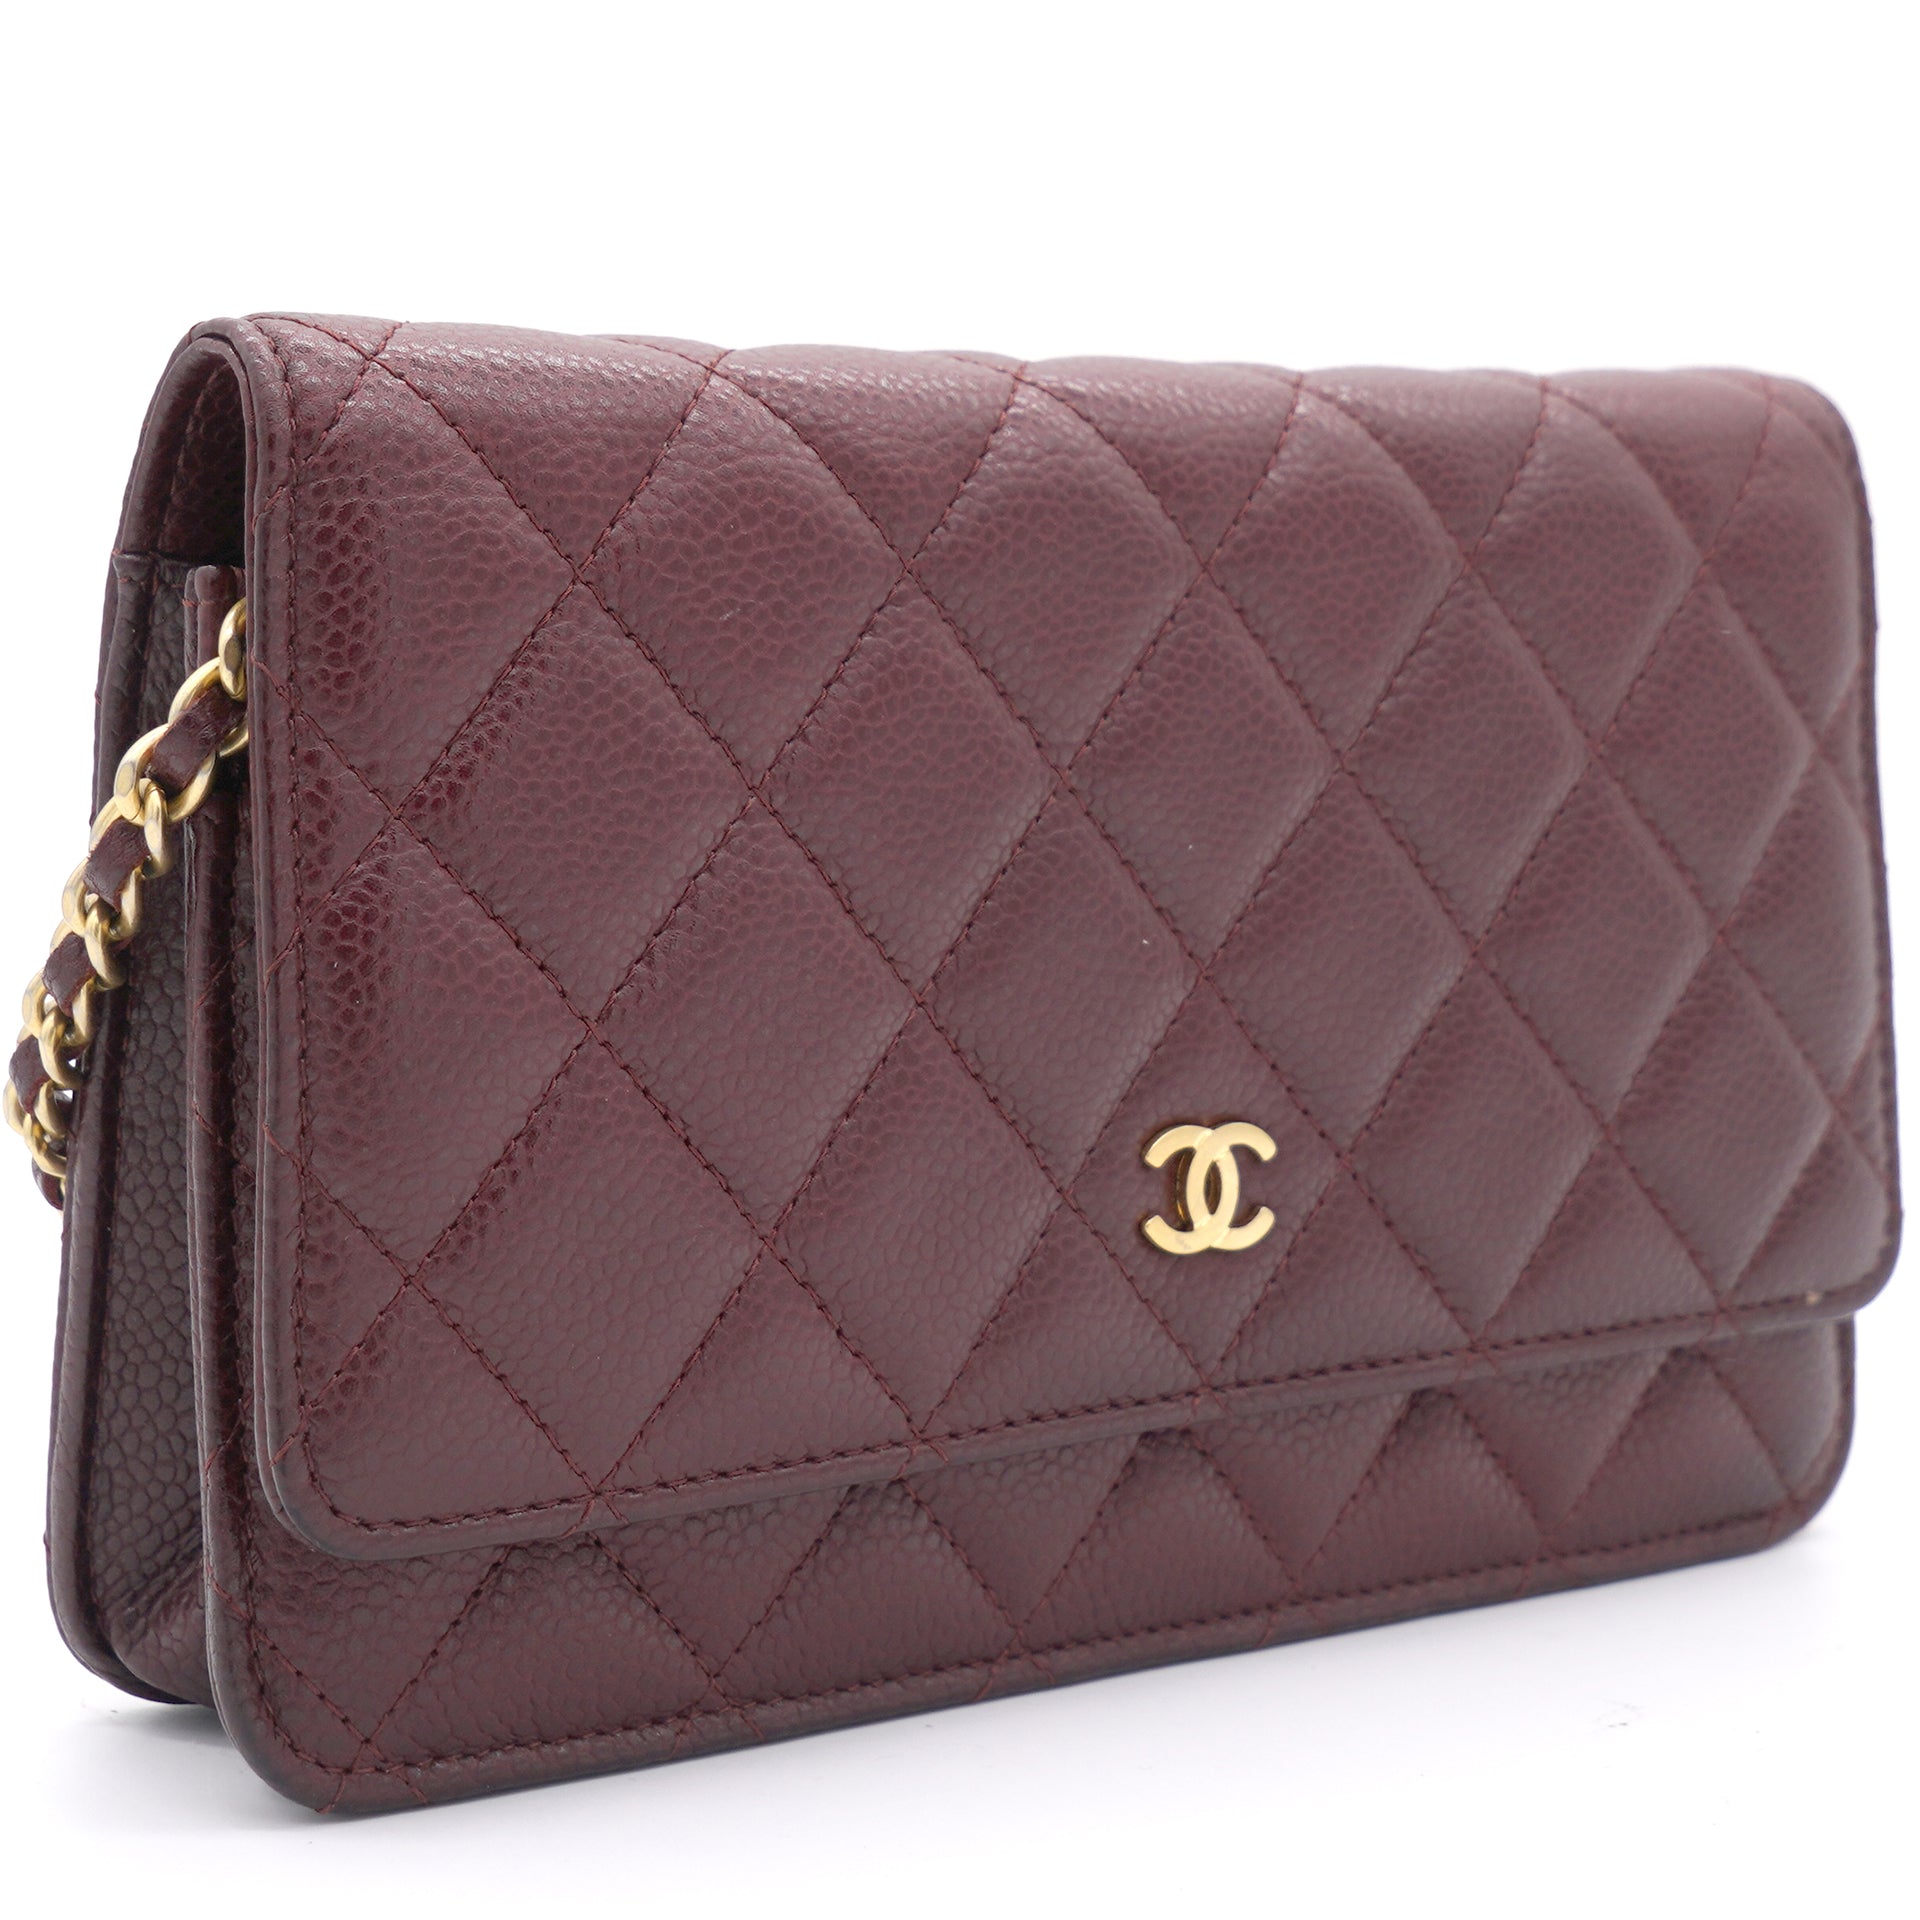 CHANEL, Bags, Reserved For Fashionfwd2 Do Not Buy